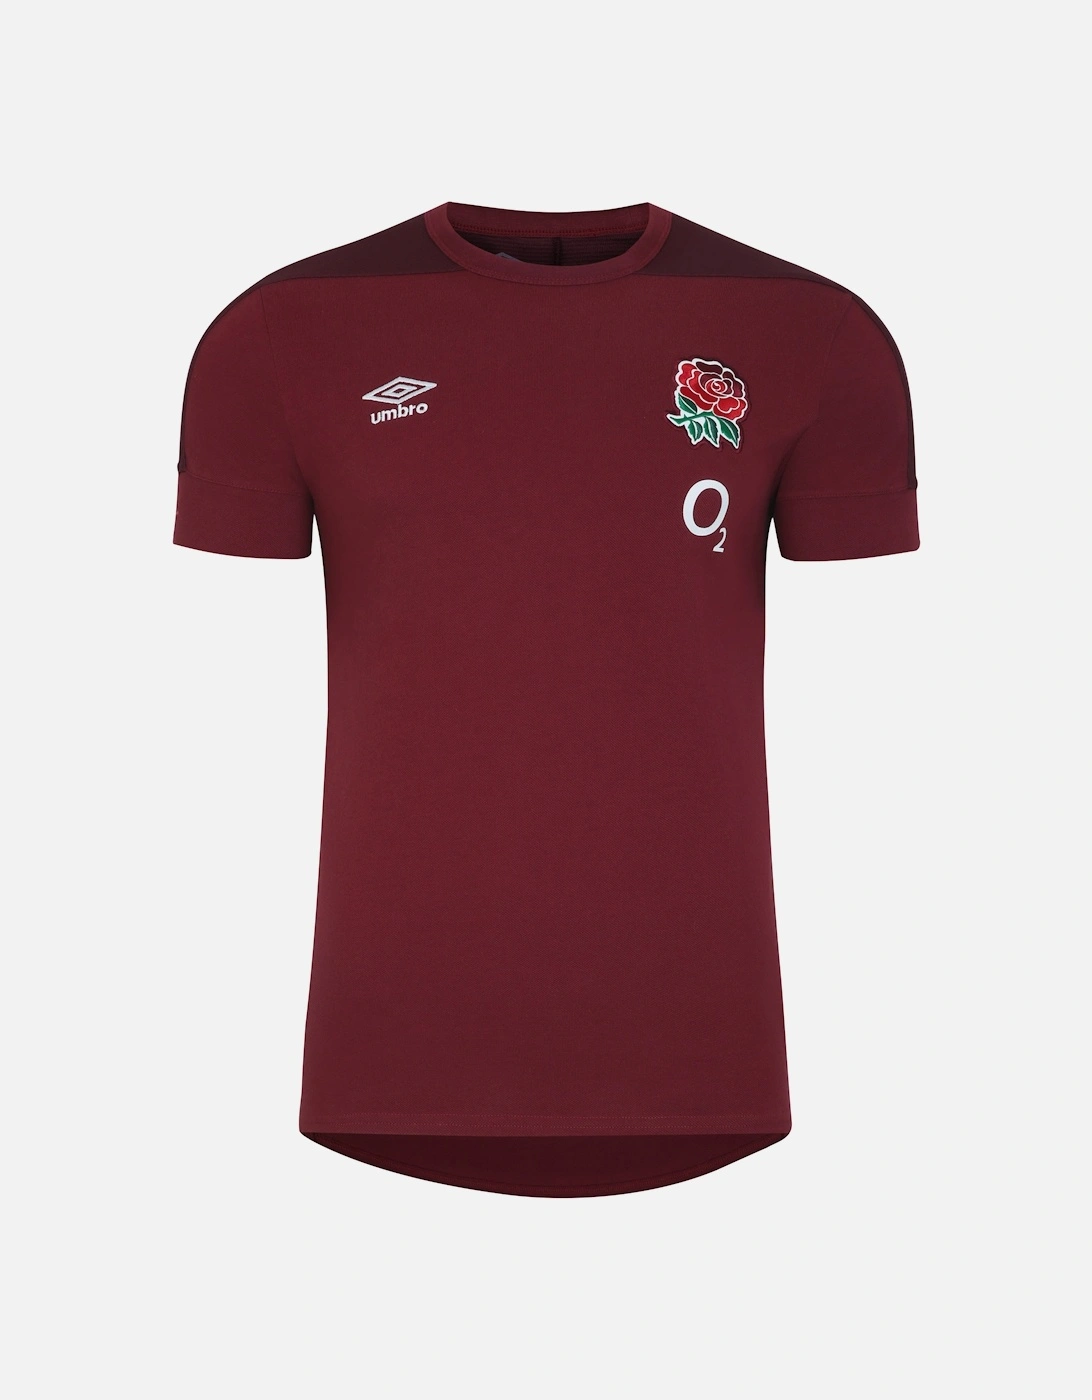 Mens 23/24 Presentation England Rugby T-Shirt, 5 of 4